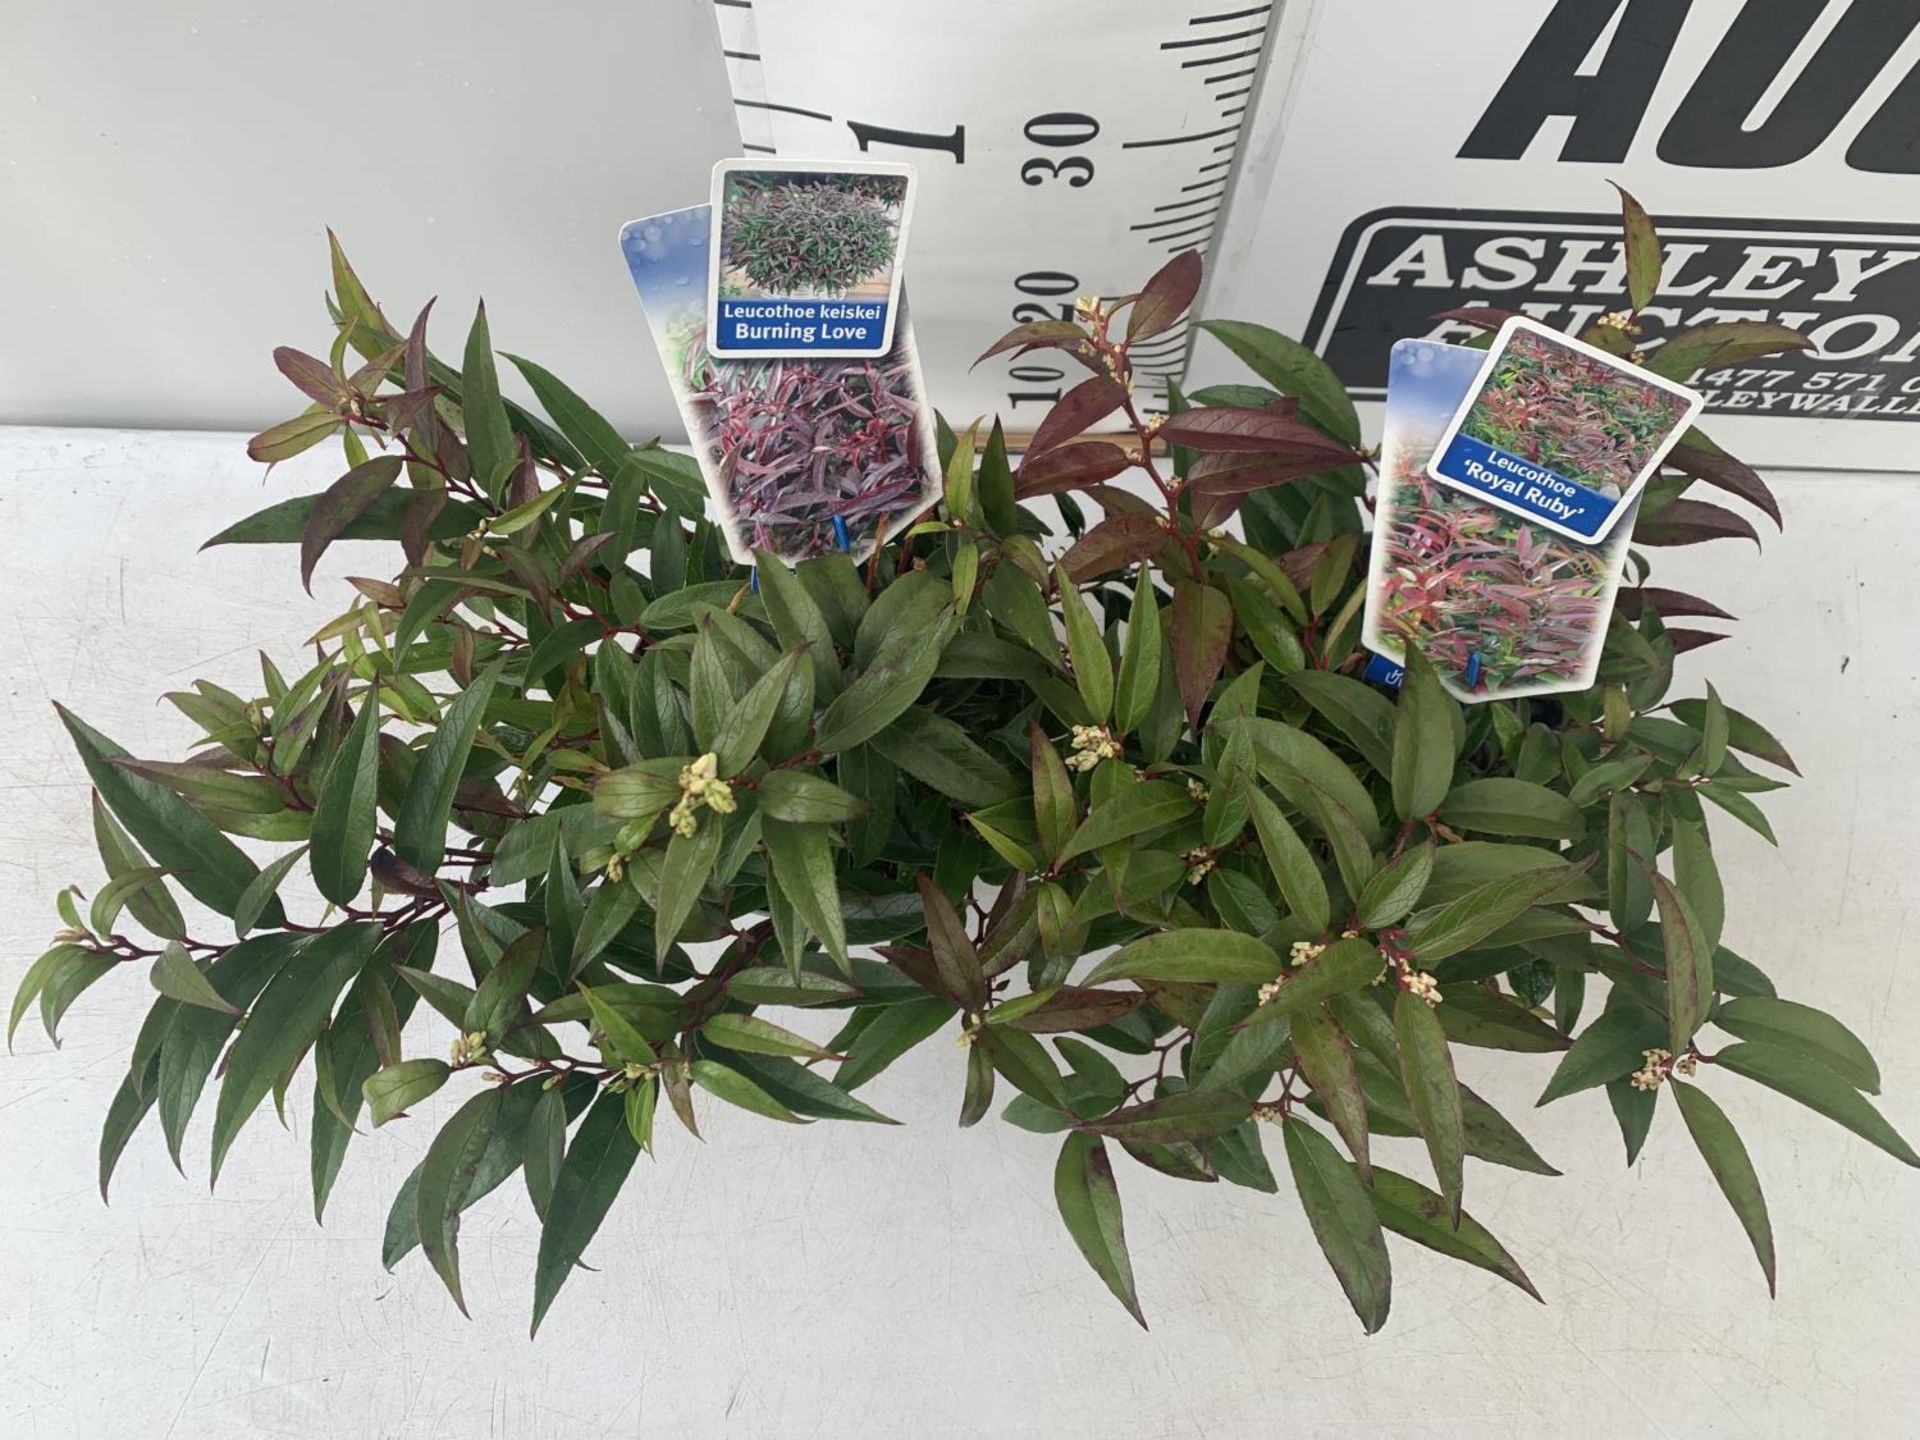 TWO LEUCOTHOE 'ROYAL RUBY' AND 'BURNING LOVE' IN 2 LTR POTS 35CM TALL PLUS VAT TO BE SOLD FOR THE - Image 2 of 6